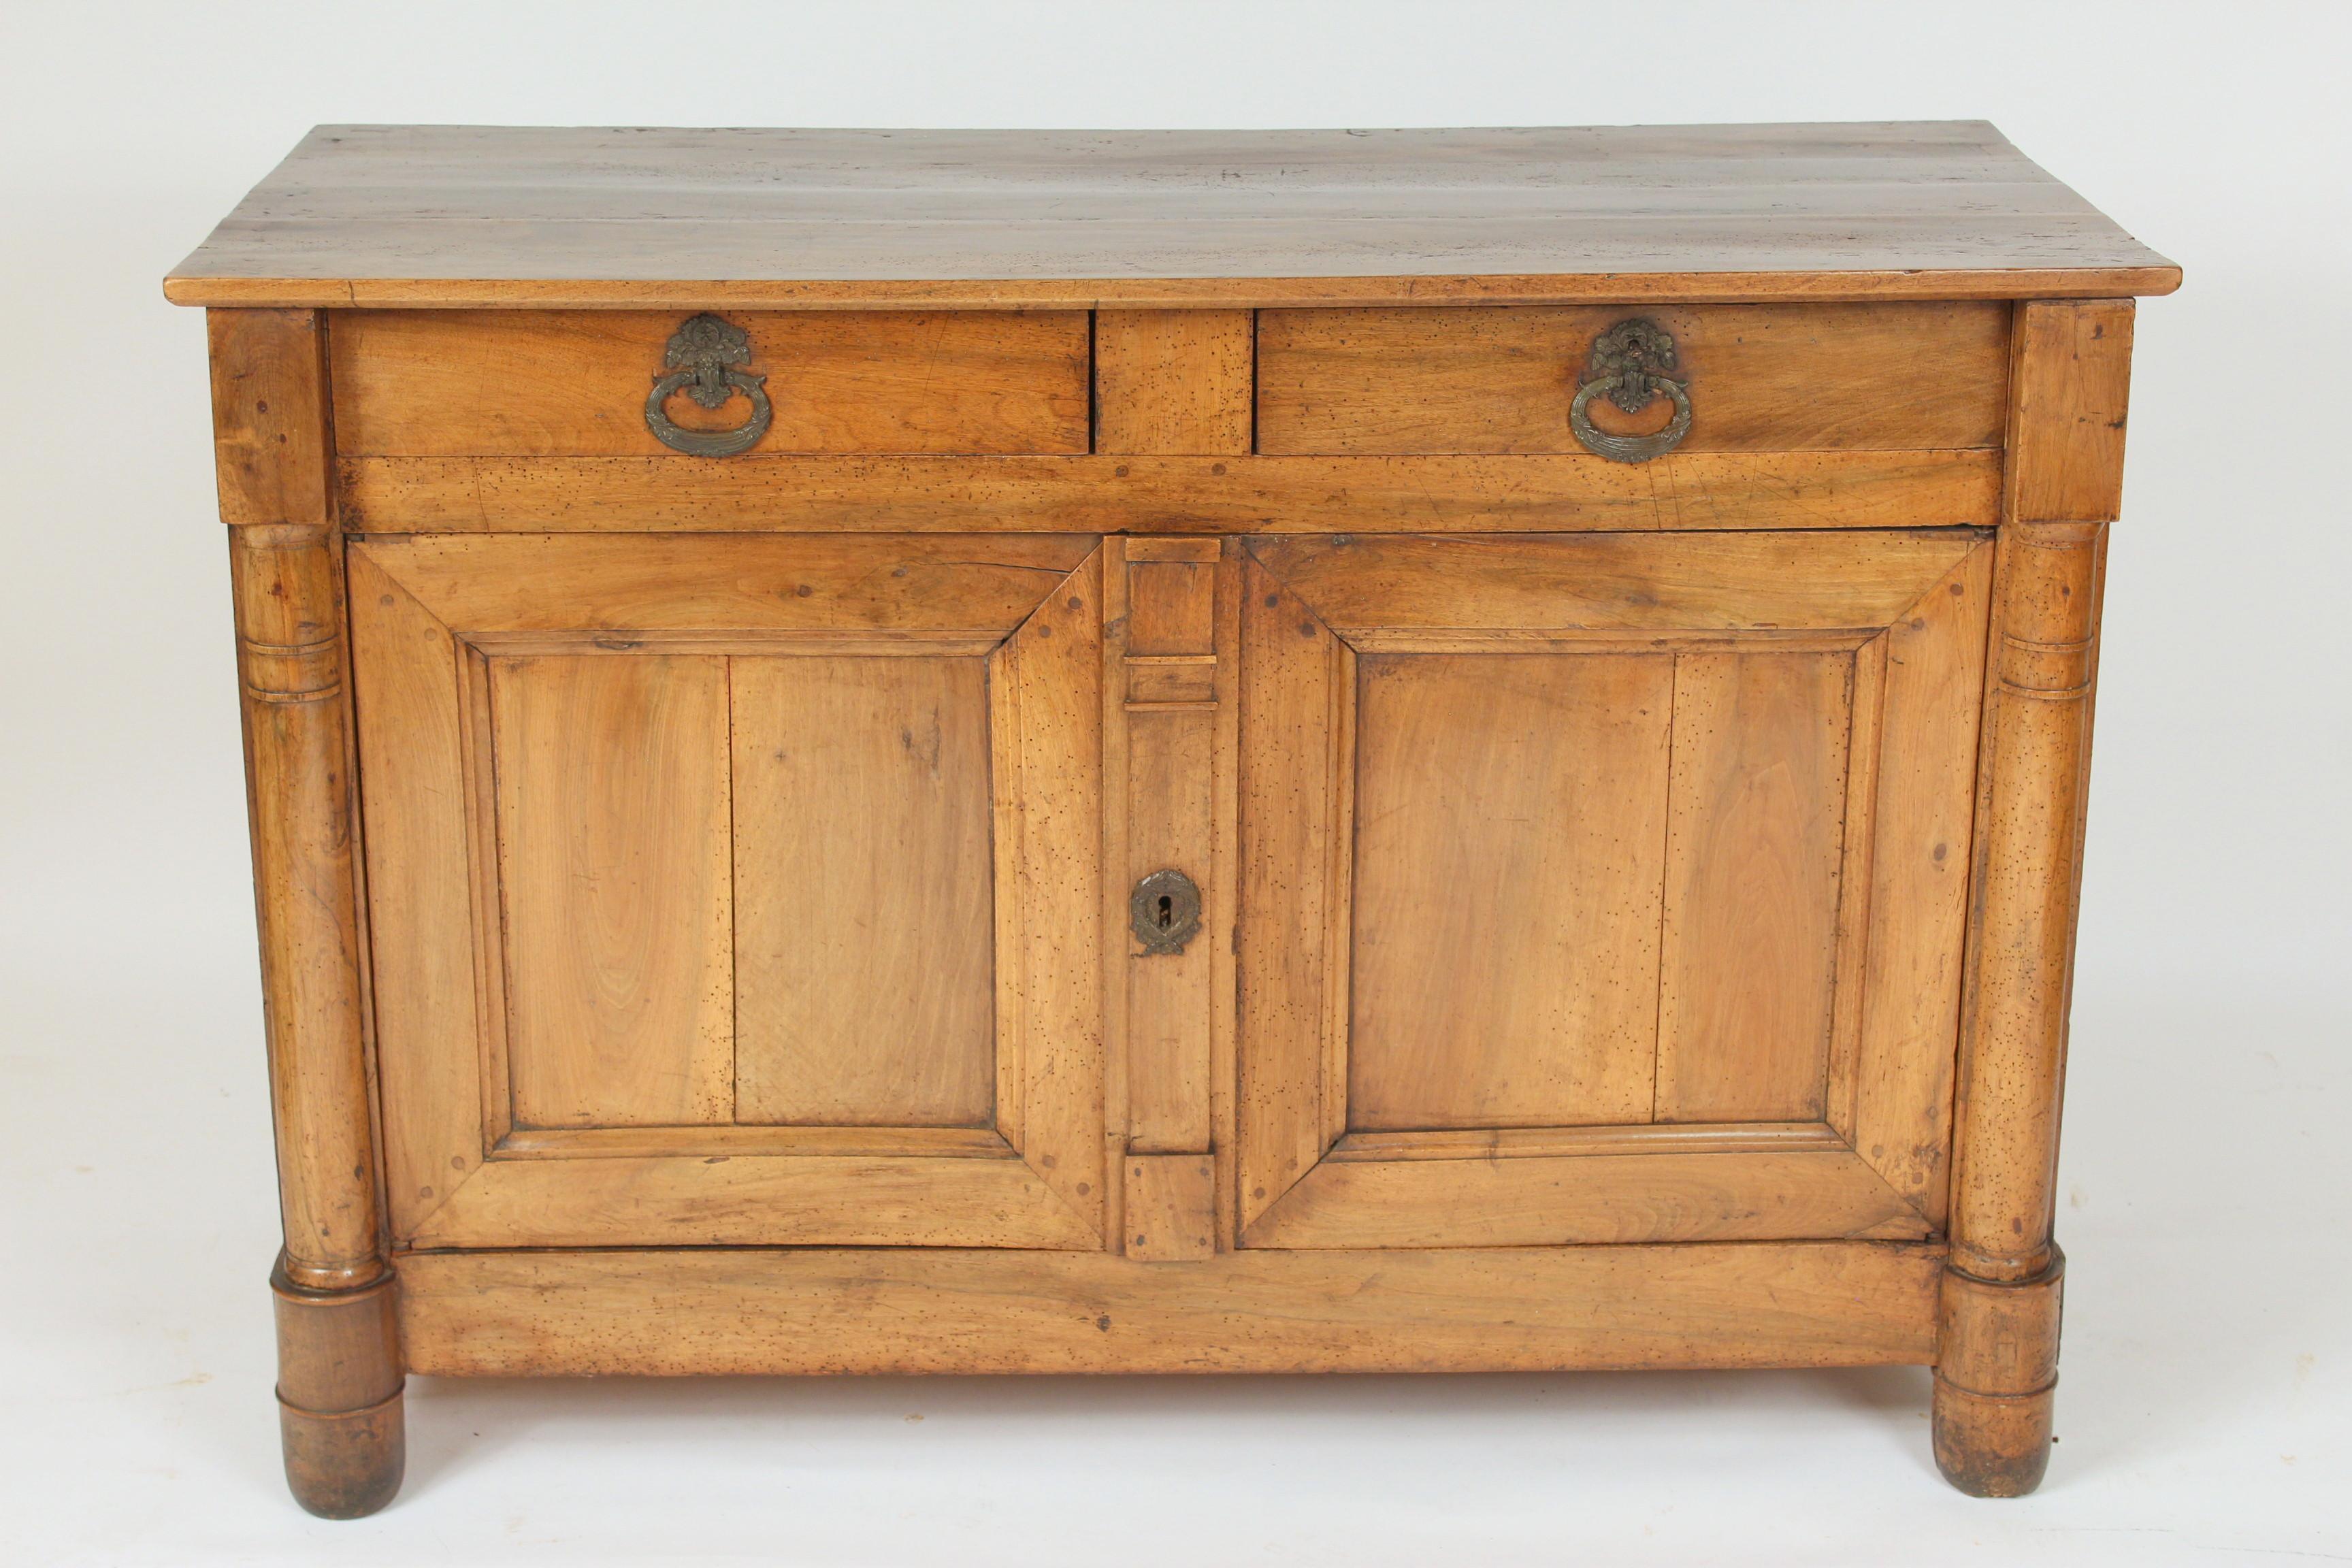 Continental Empire walnut and fruitwood buffet, circa 1820. This buffet has excellent old color, mortise and Tenon case construction and dove tailed drawers.